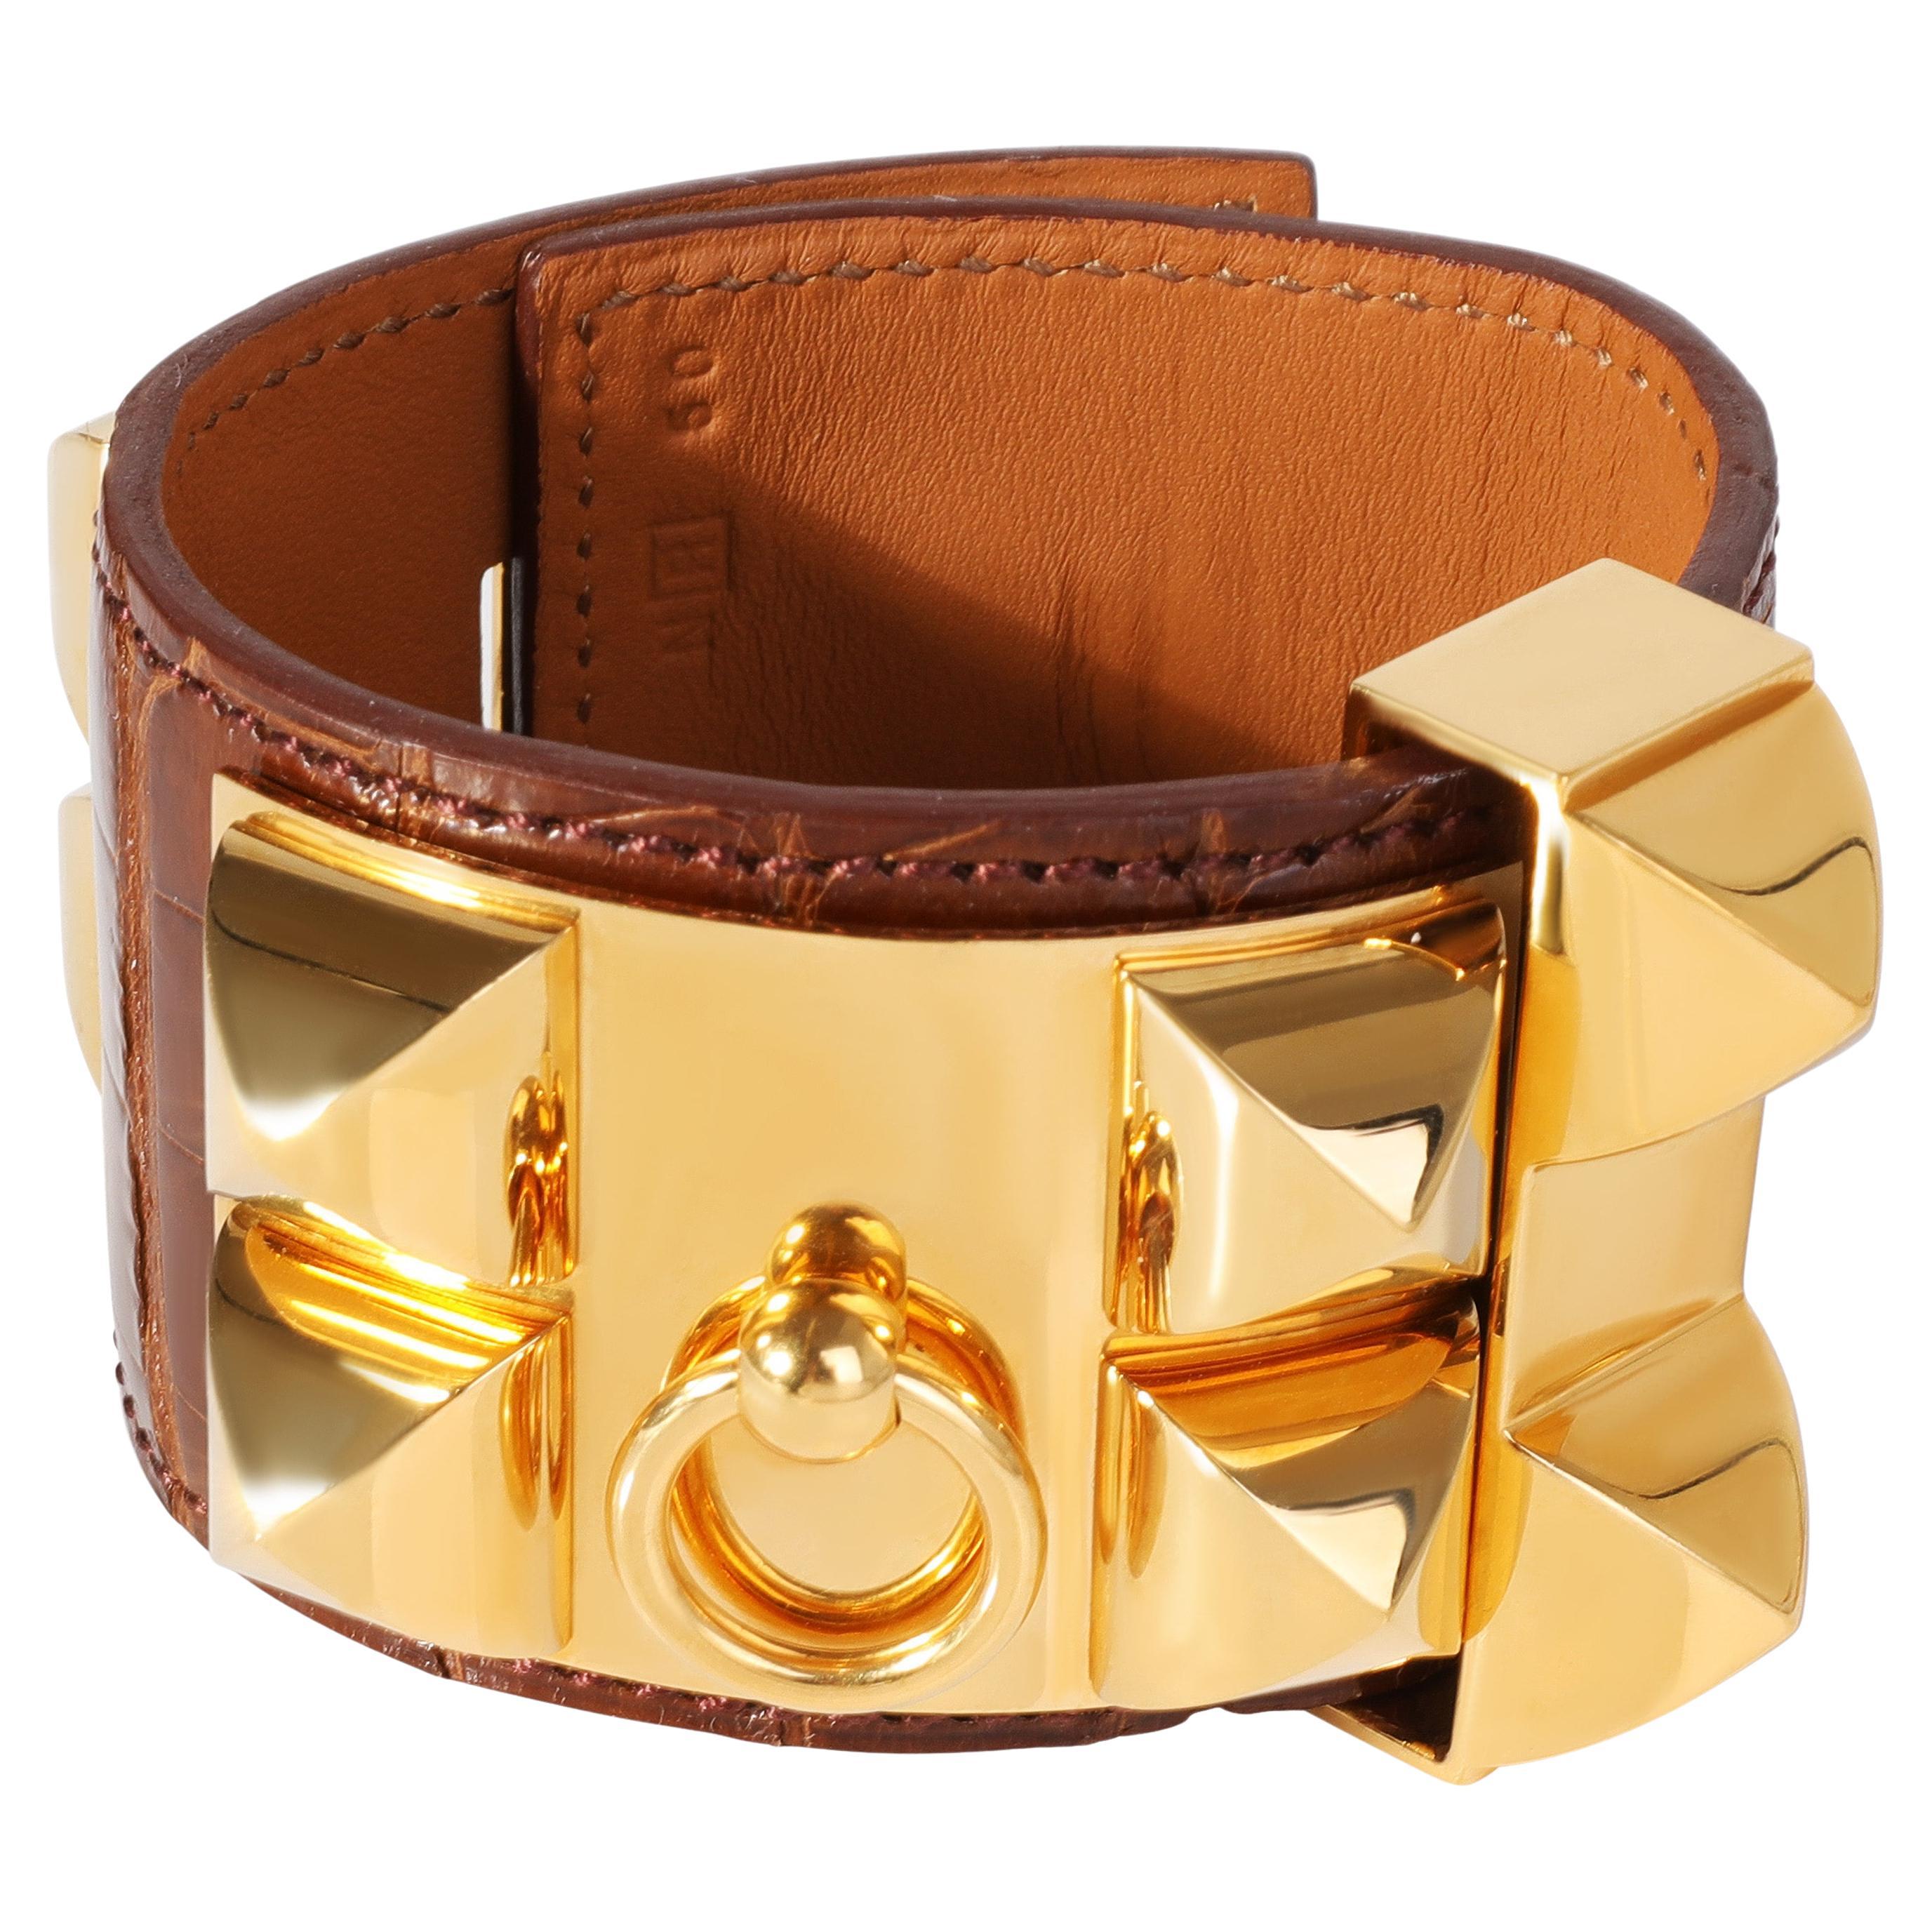 Hermes Collier De Chien Brown Leather Gold Tone Cuff For Sale at 1stDibs |  hermes collier de chien bracelet gold, collier de chien bracelet gold